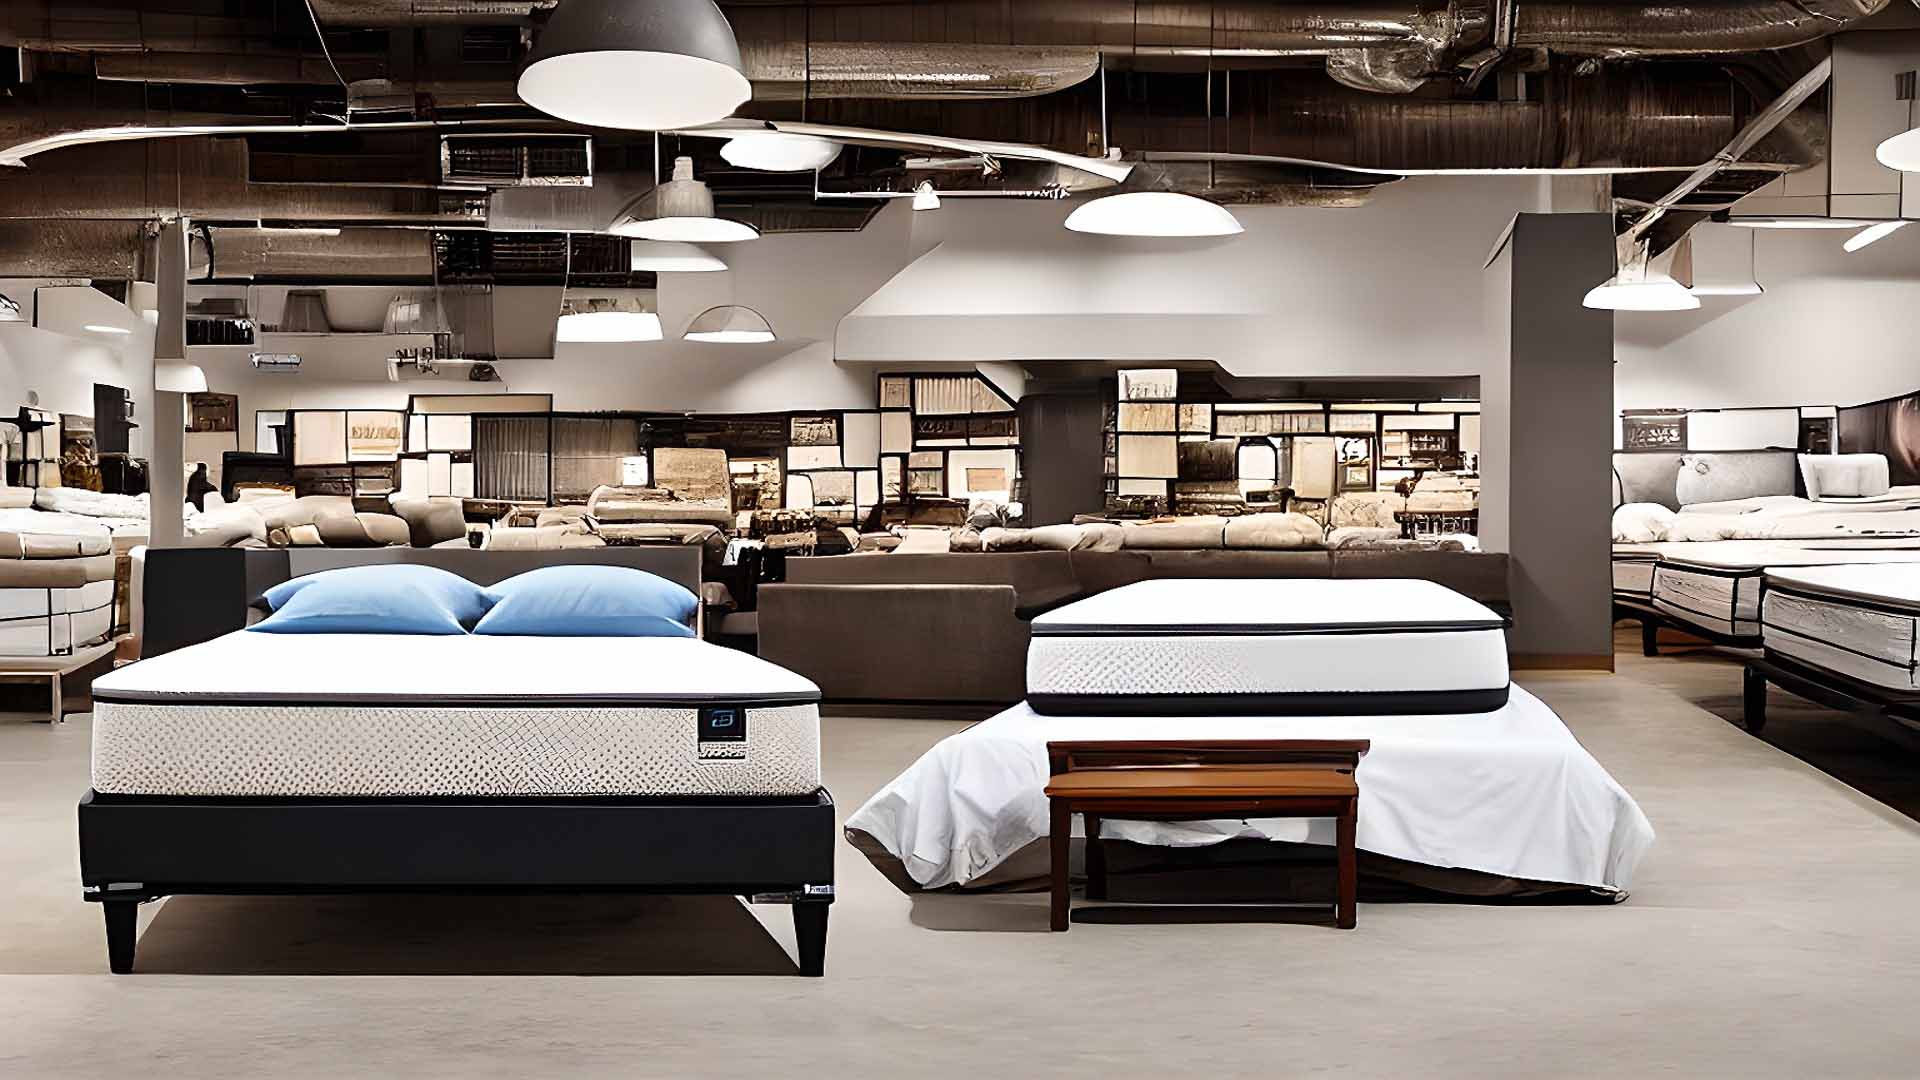 Mattress Outlet Showroom With Queen Beds Des Moines, IA